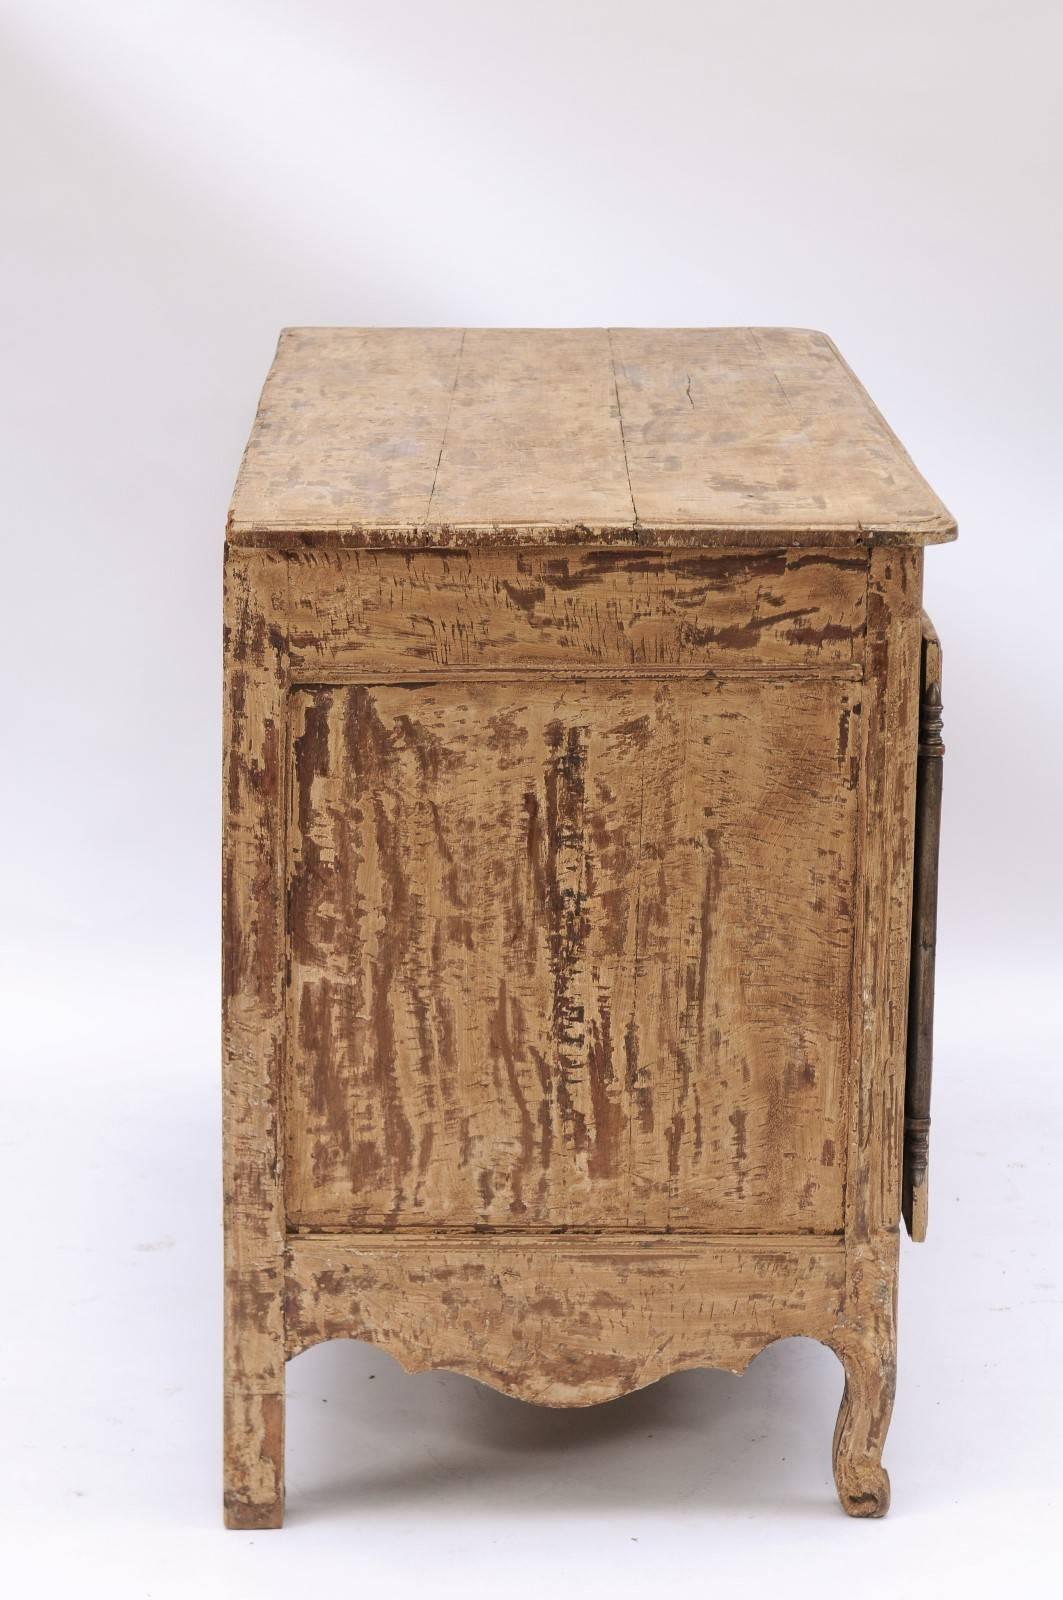 Carved 1780s Stripped Wood Two-Door Buffet from the Auvergne Region of France